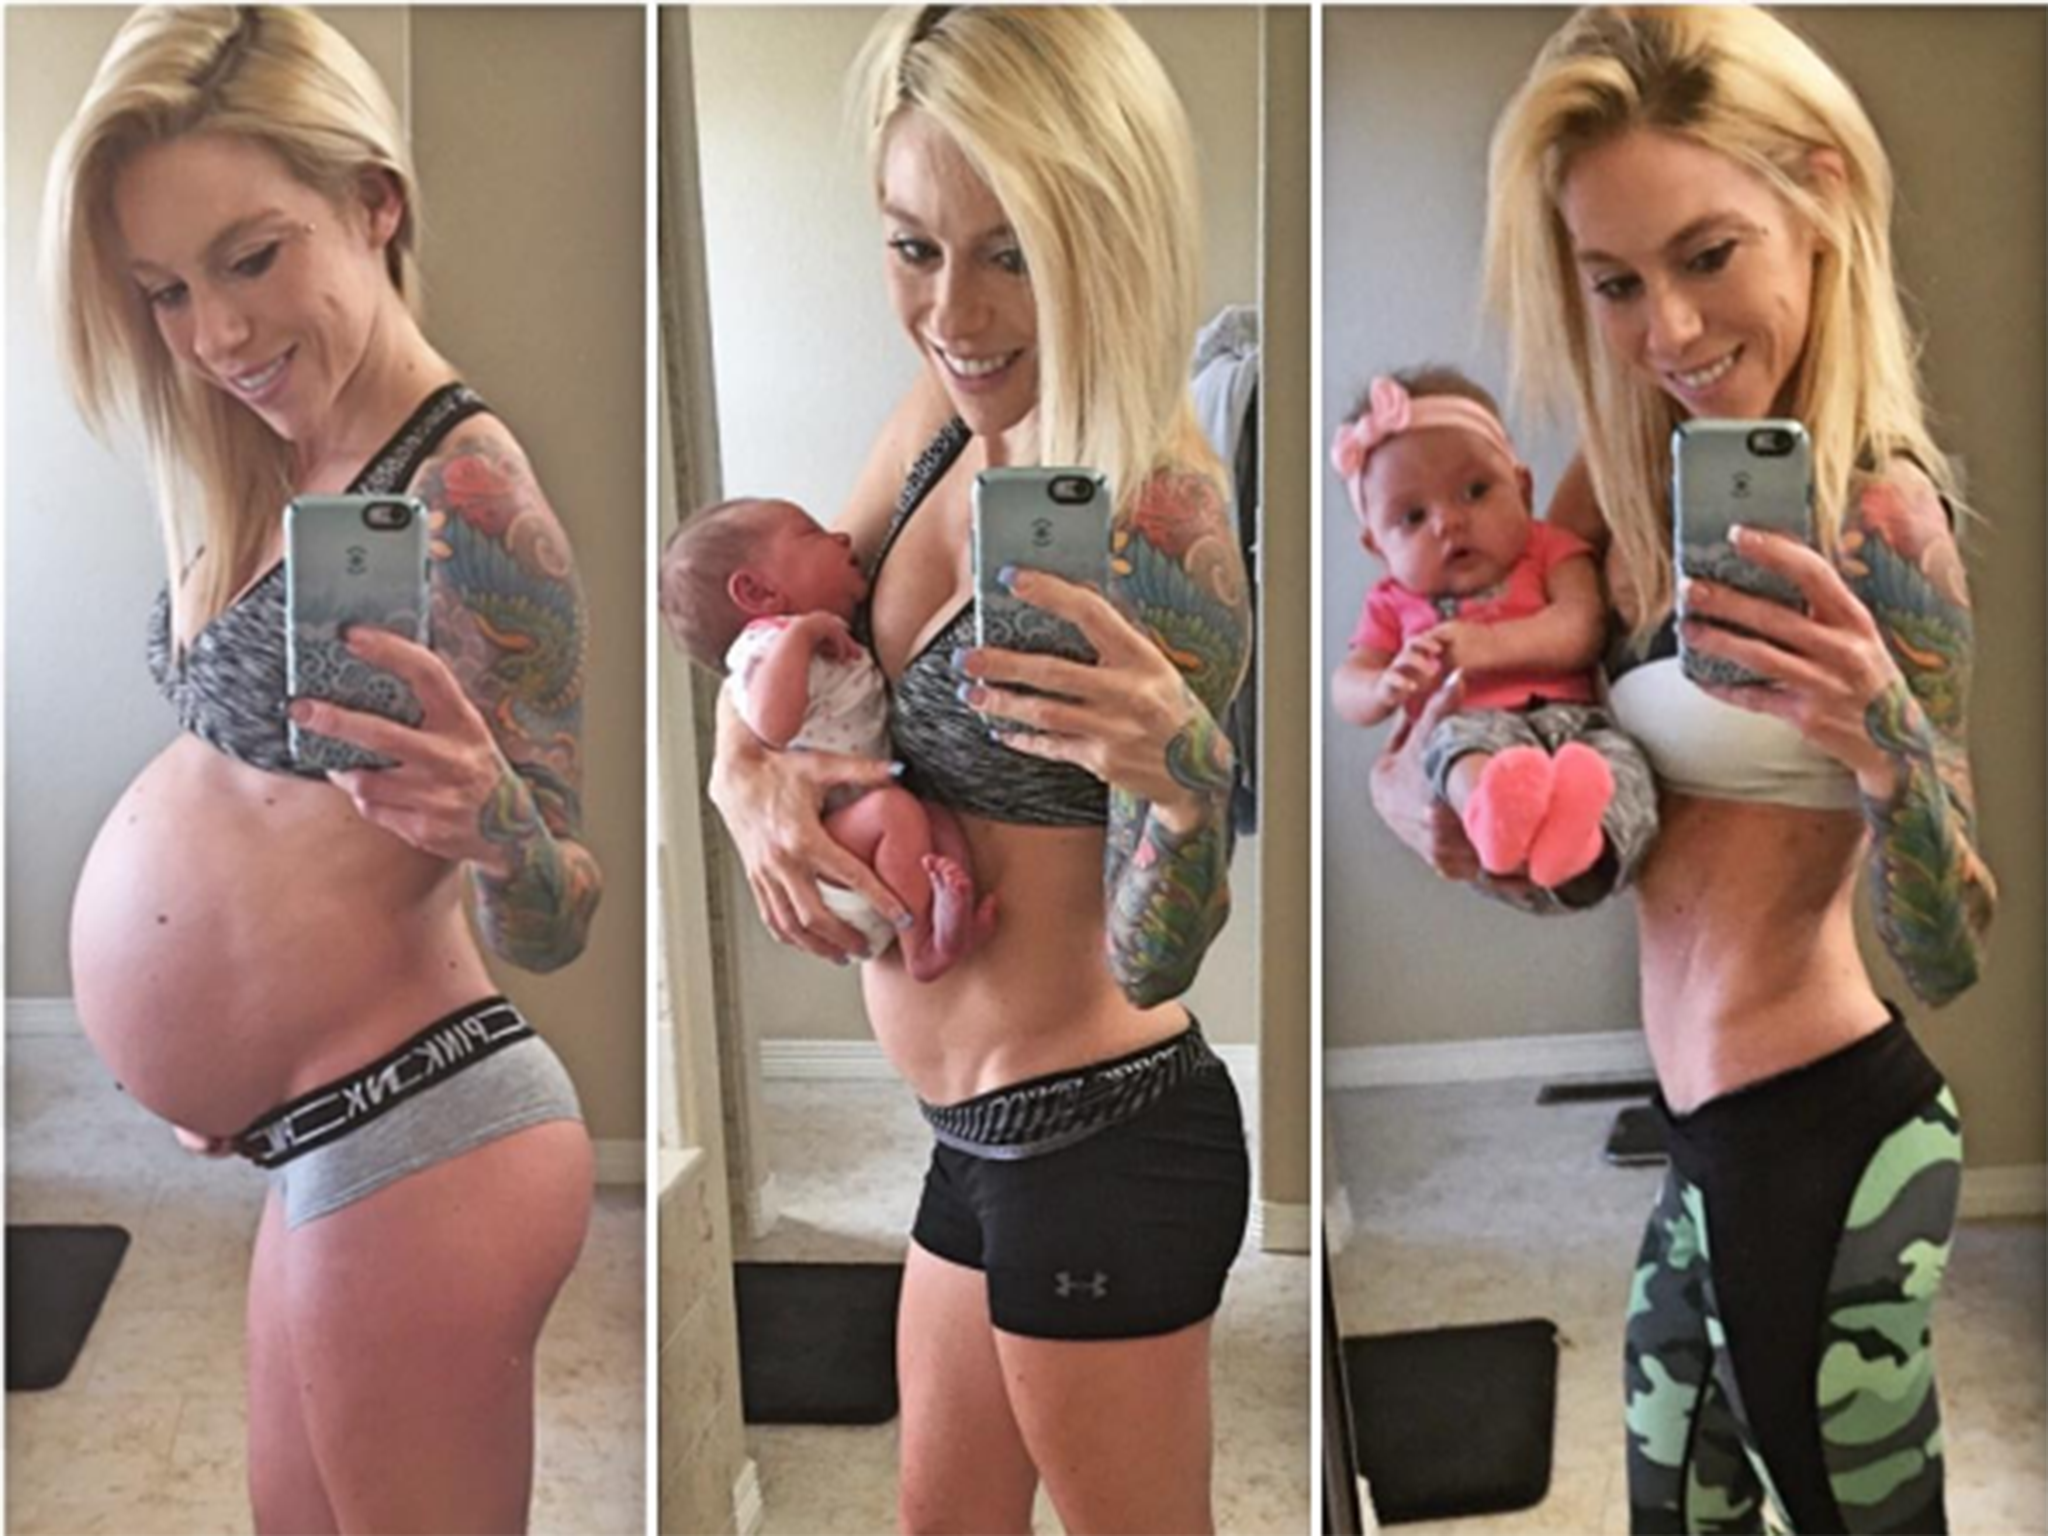 Women are posting photographs showing their abs during pregnancy